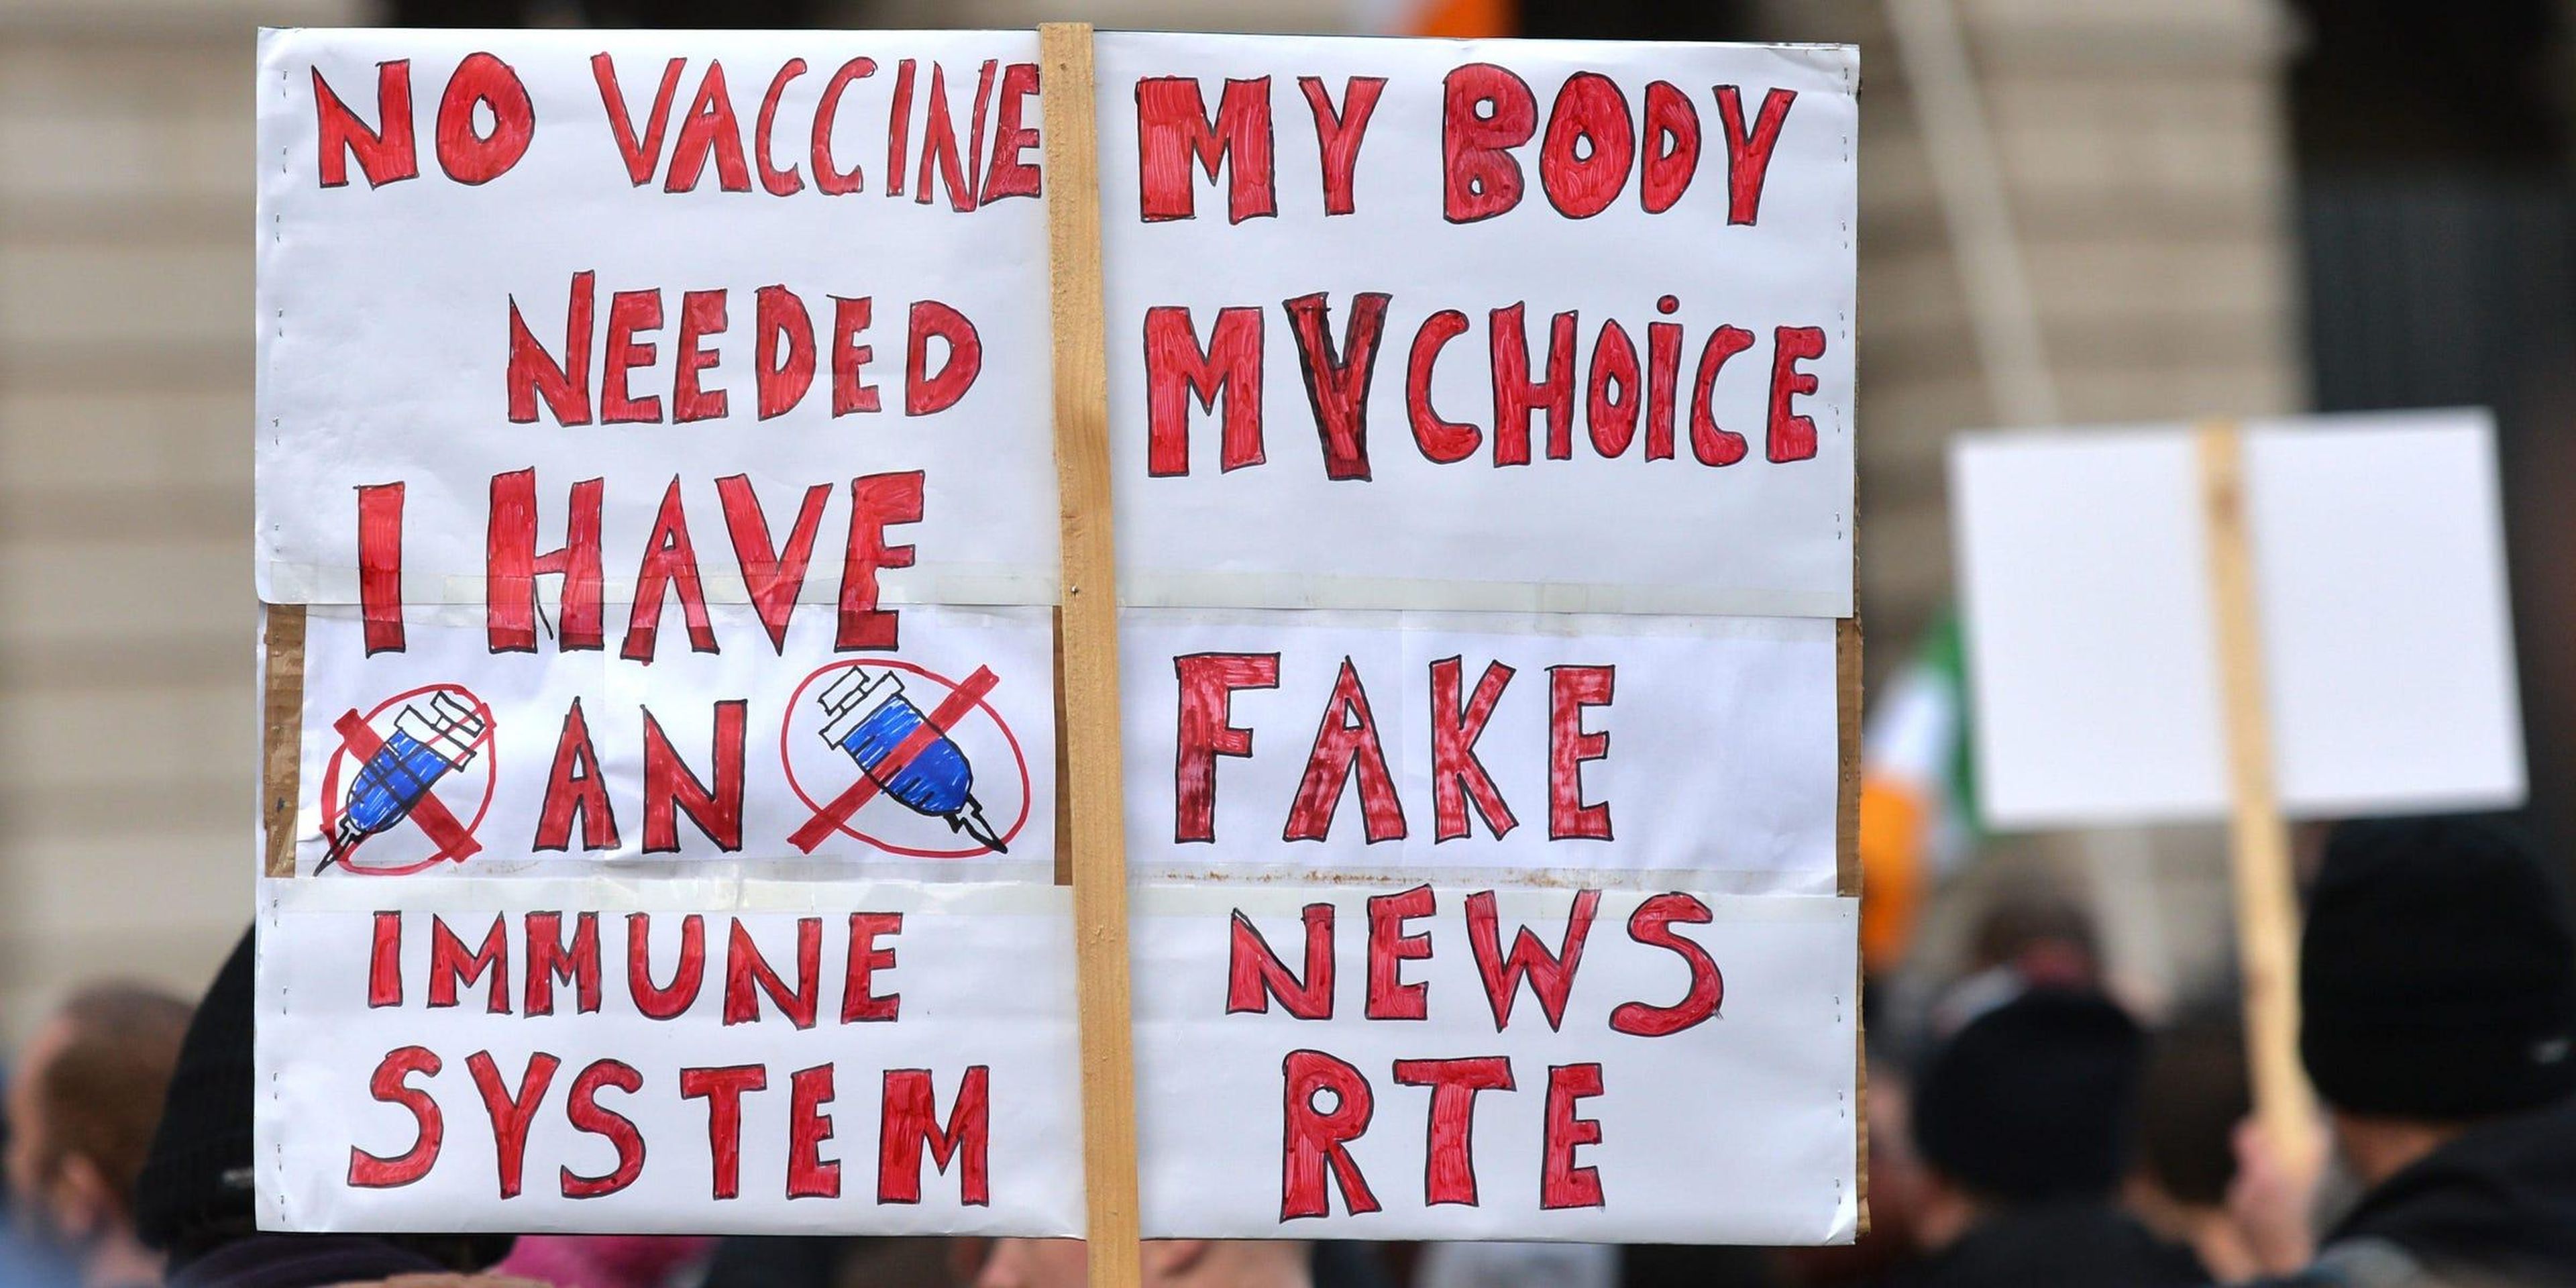 A protester holds a placard during the Irish Freedom Party an anti-vaccination and anti-lockdown rally outside the Custom House, on day 39 of the nationwide Level 5 lockdown. On Saturday, November 28, 2020, in Dublin, Ireland.